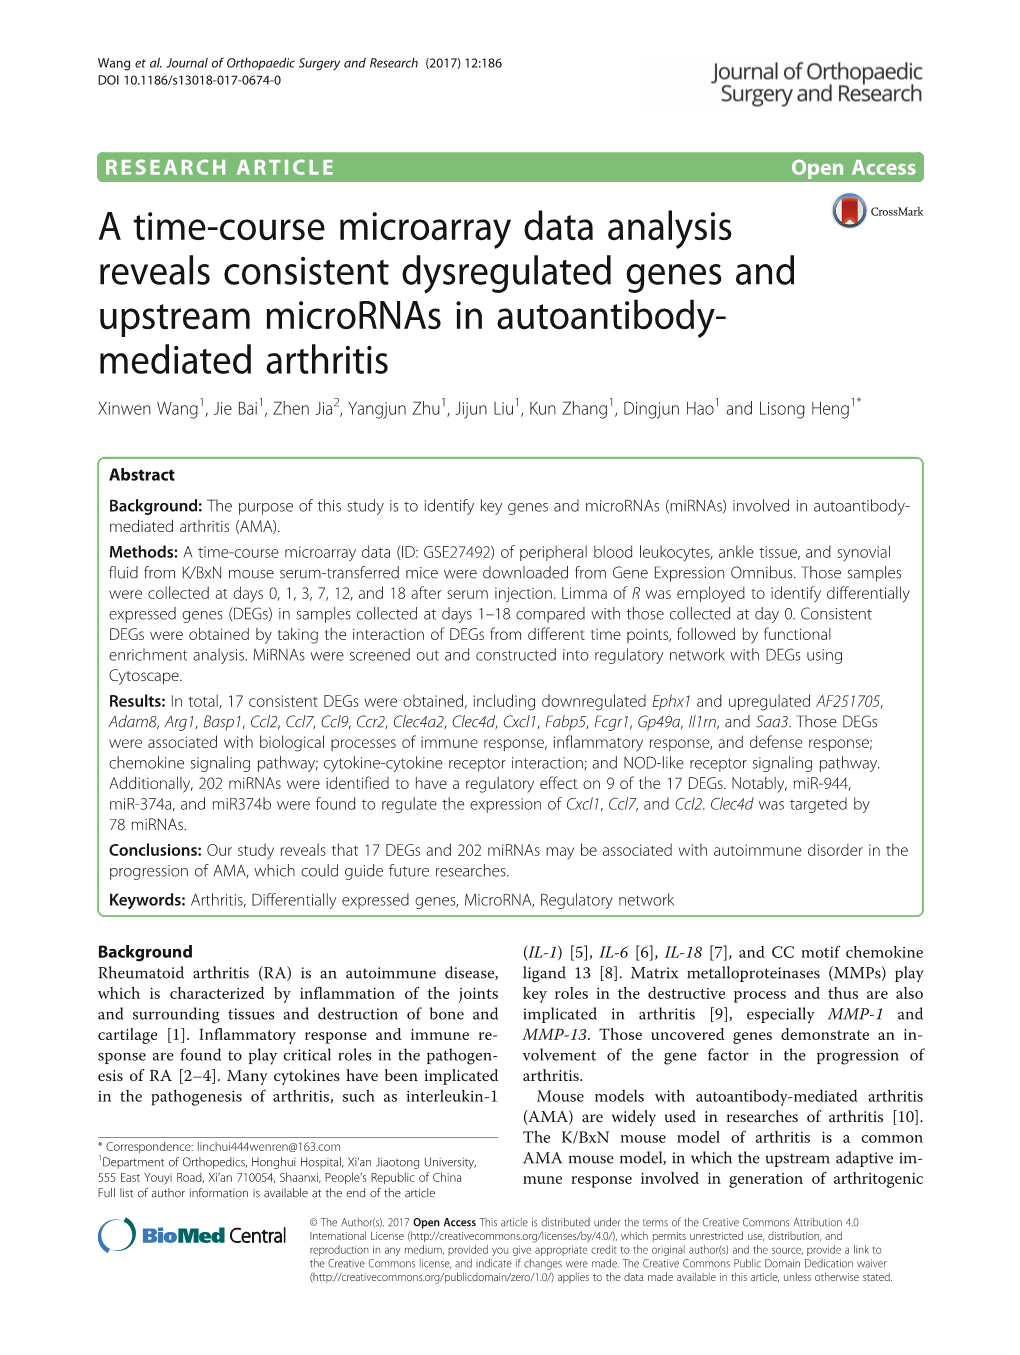 A Time-Course Microarray Data Analysis Reveals Consistent